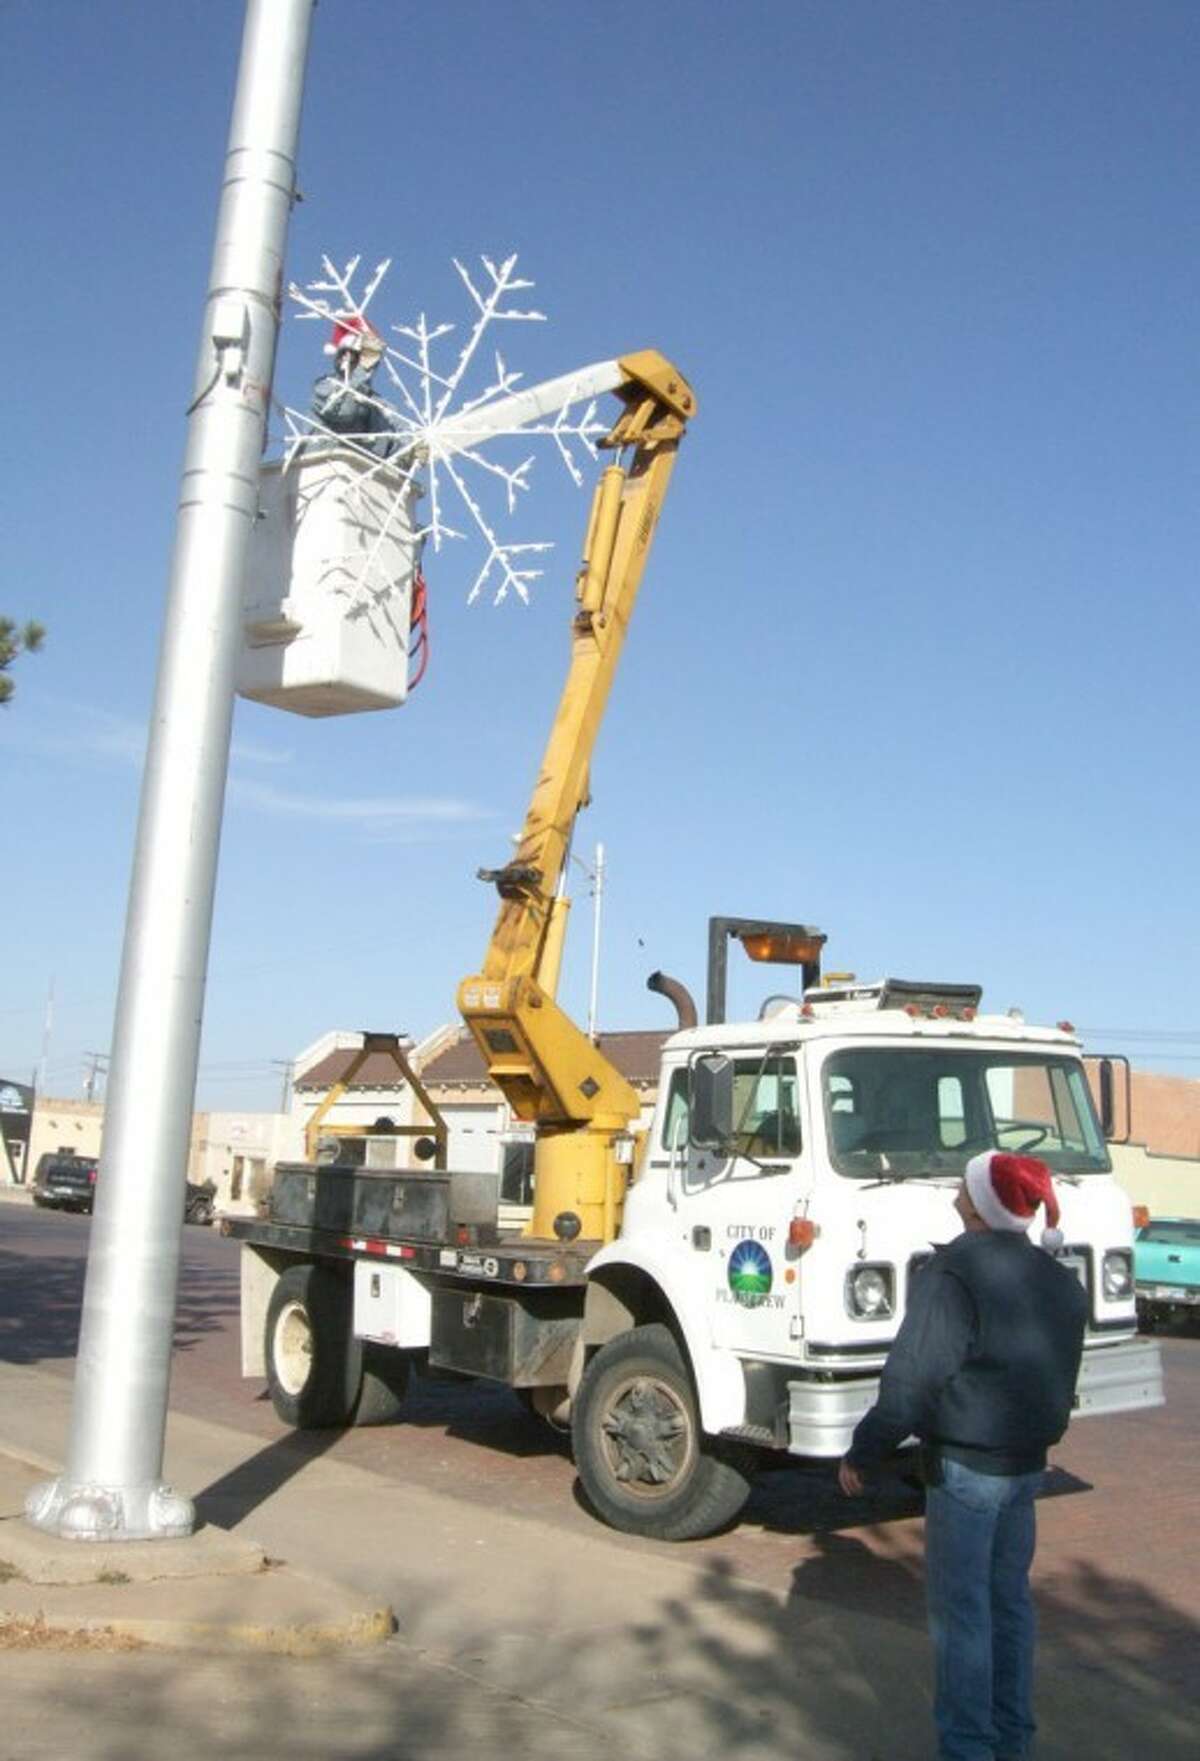 City of Plainview employees Felix Ruiz (on cherry picker) and Richard Alvis work Monday putting up new Christmas lights. About 40 6-foot-tall snowflake lights are going up on Broadway, Ash and Sixth streets. The lights — valued at more than $10,000 — were purchased at a discounted price during the off-season early this year.